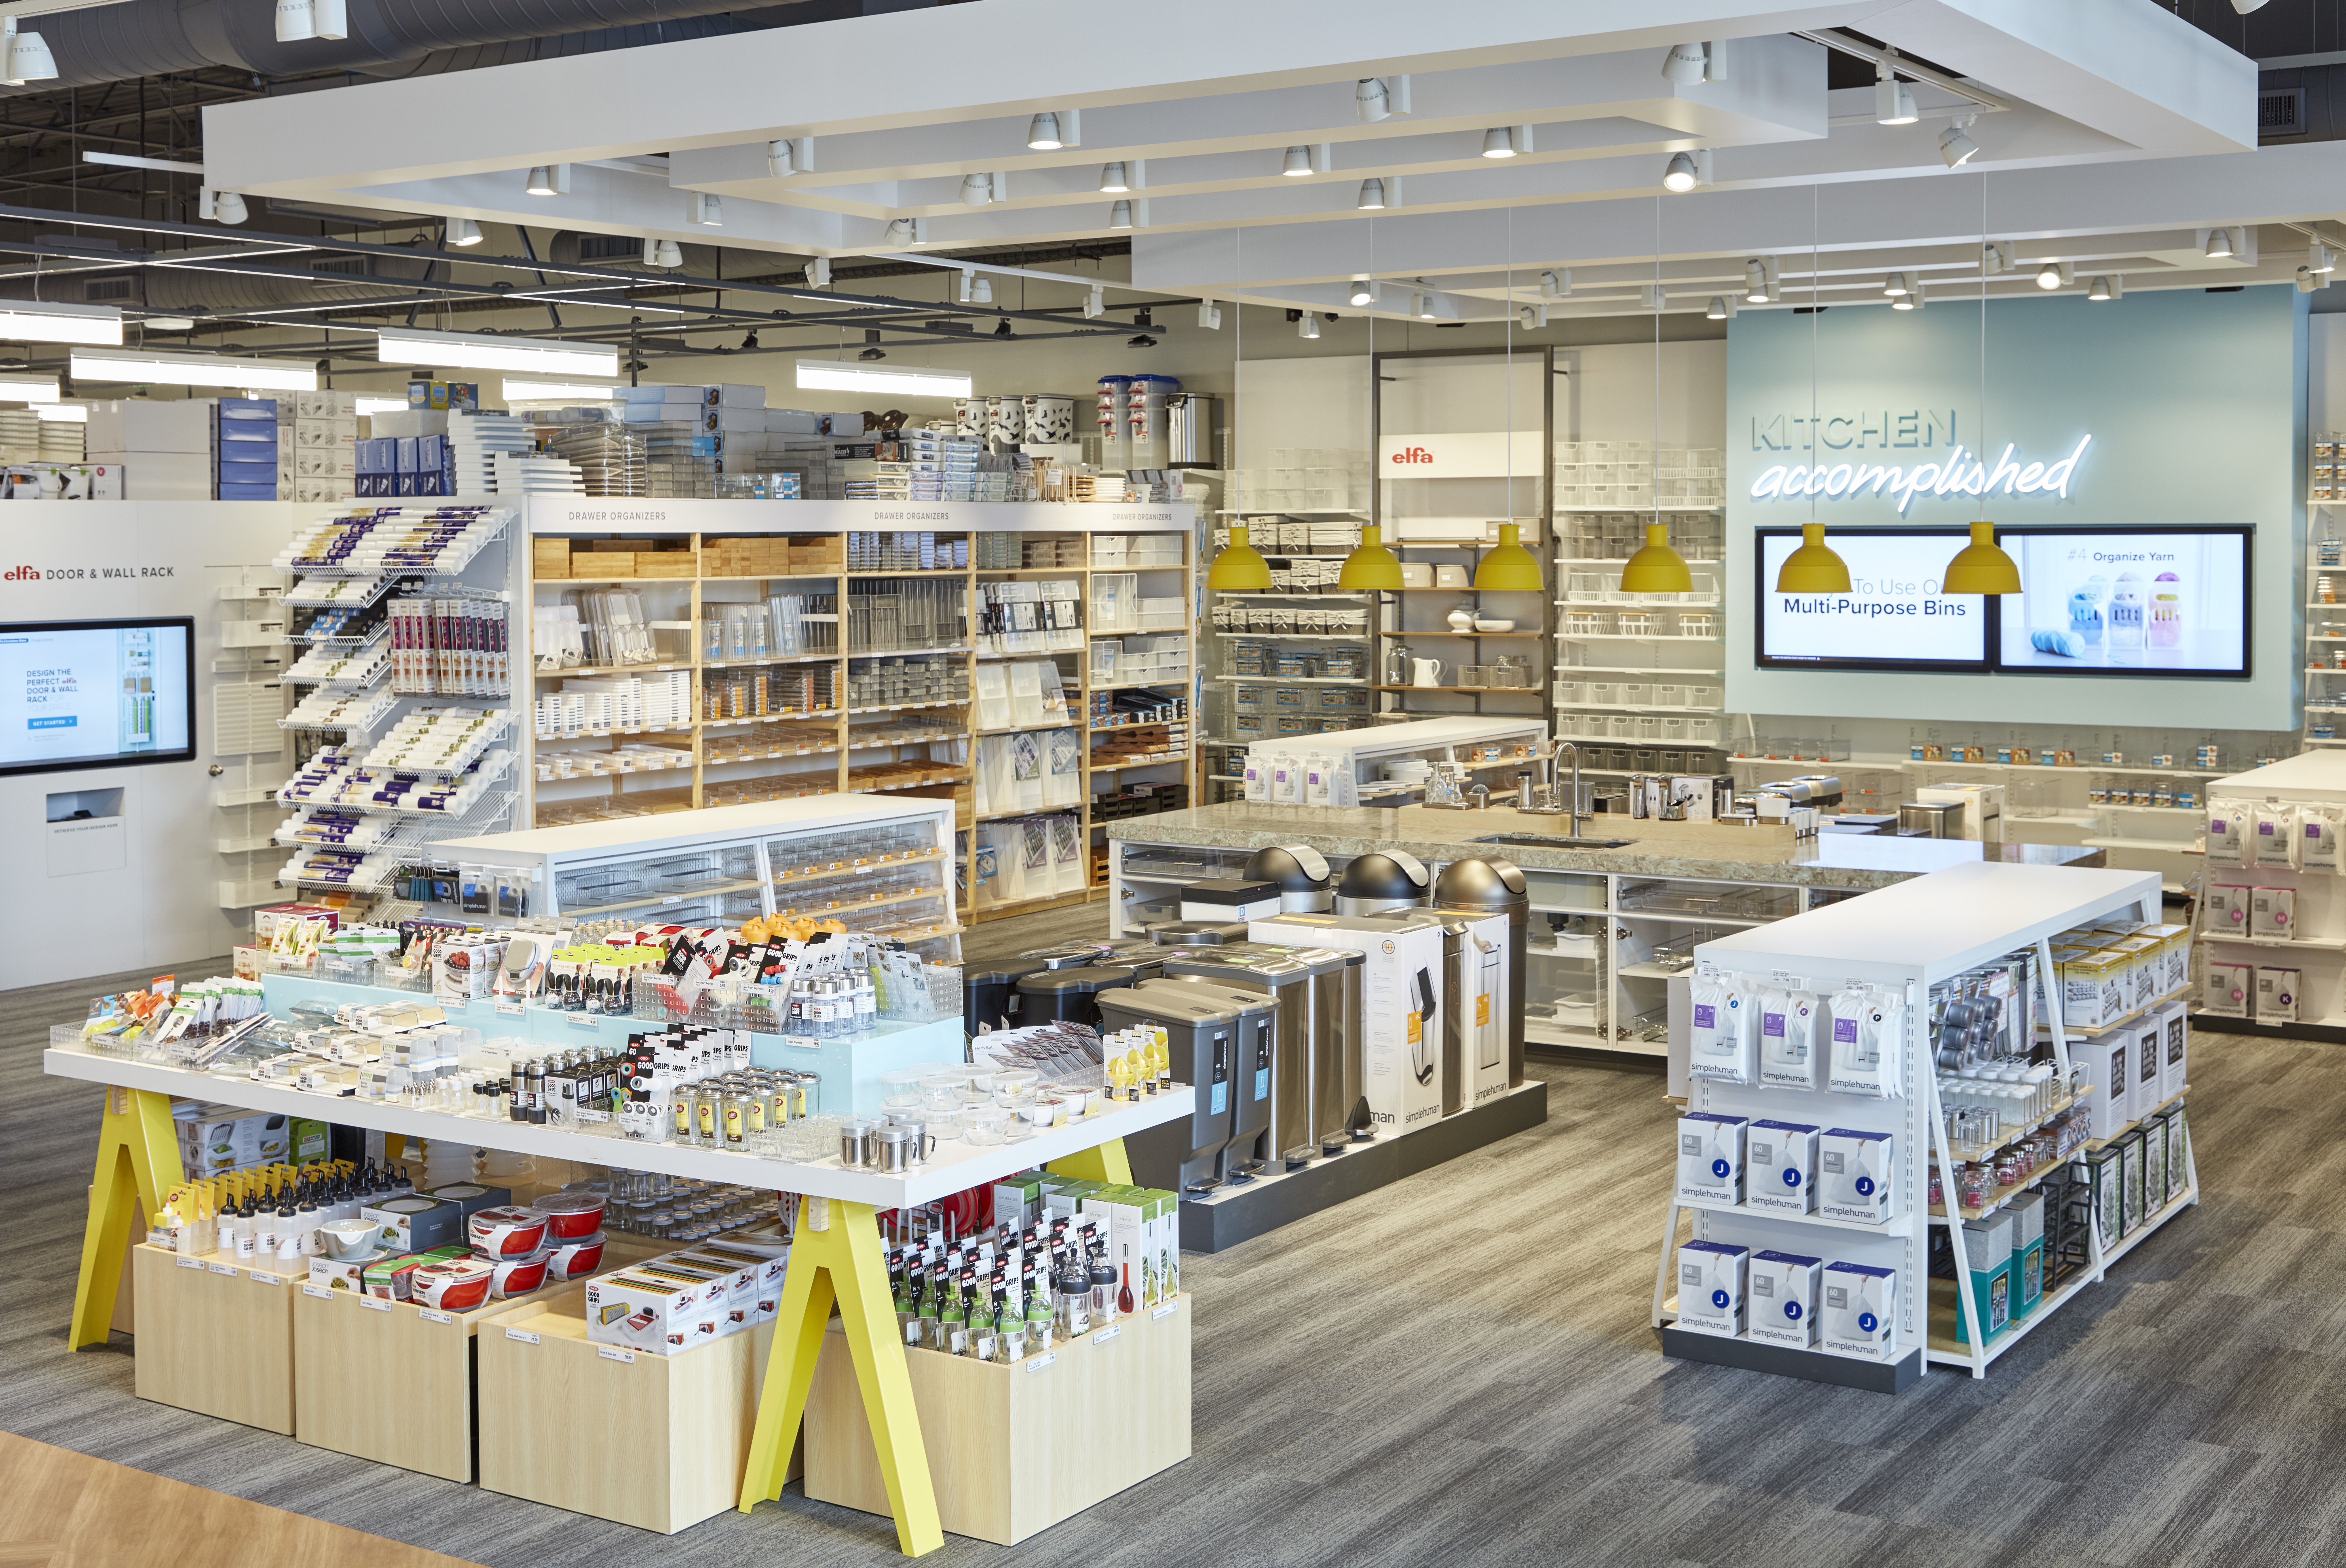 The Container Store Plans 74 New Locations by 2027 - Retail